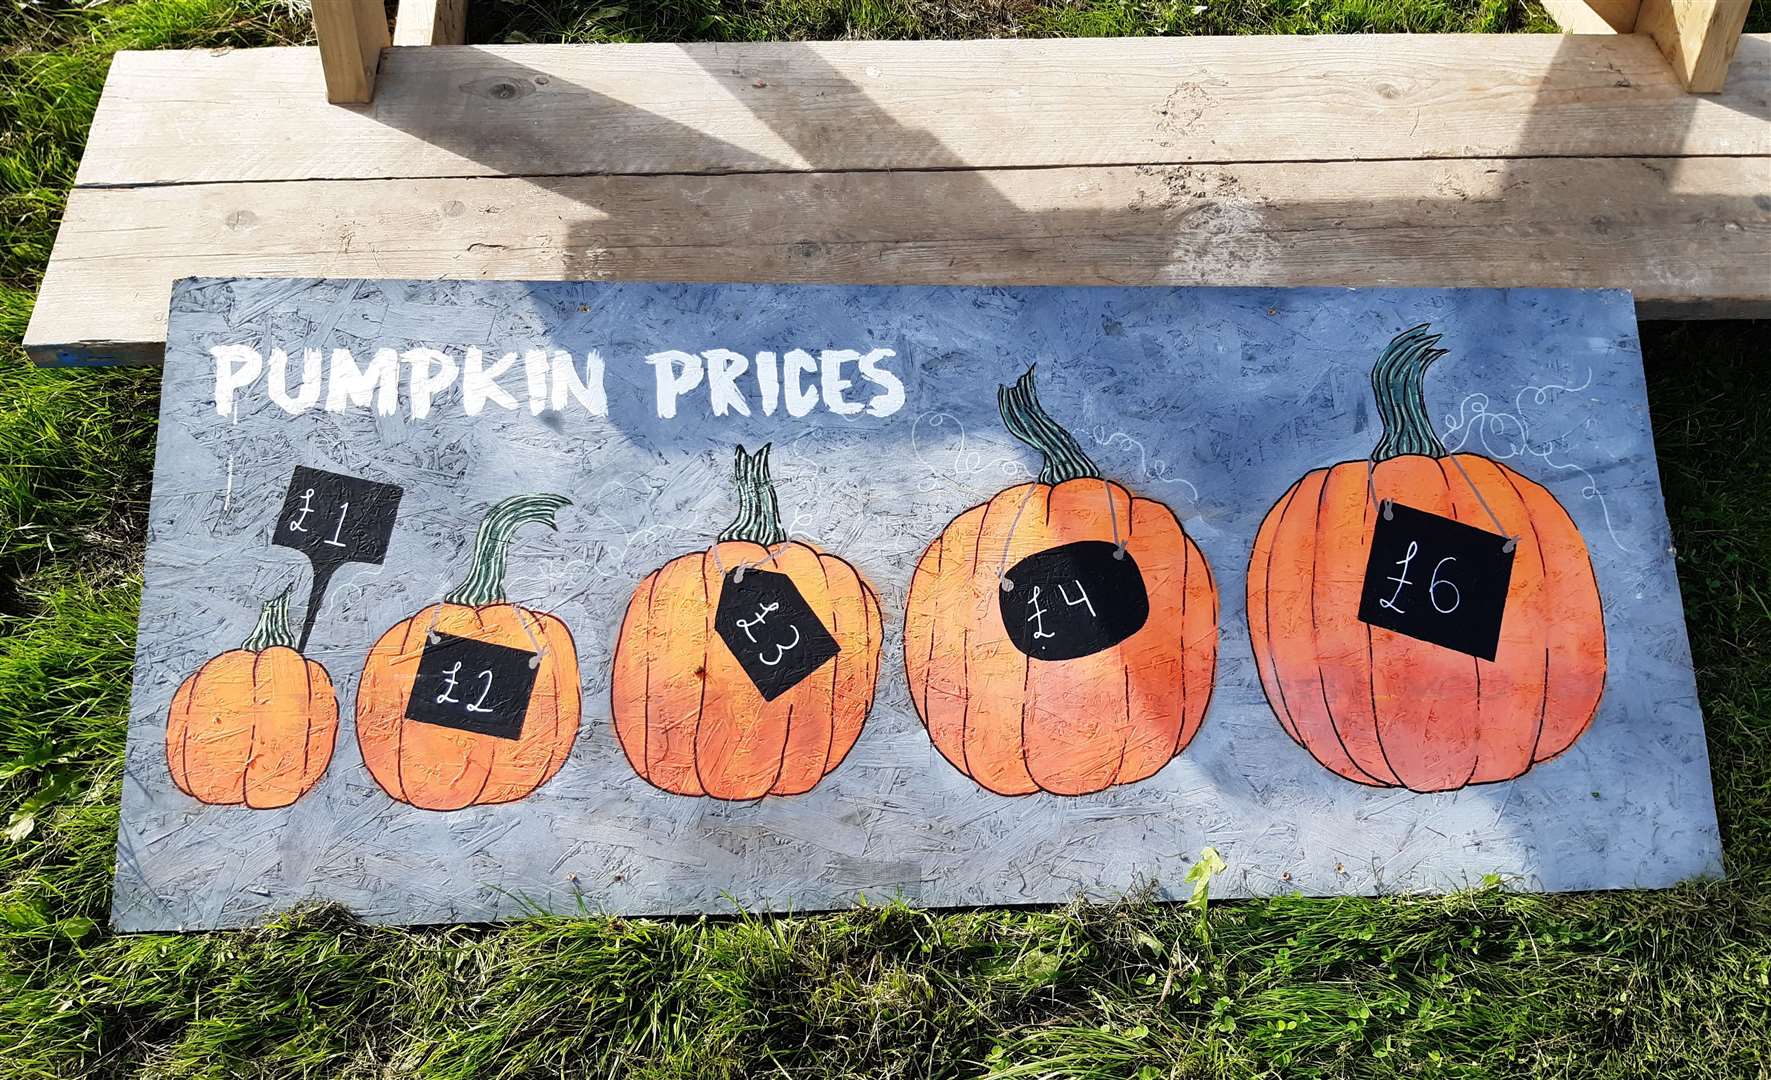 Prices of pumpkins range from £1 to £6 at the farm